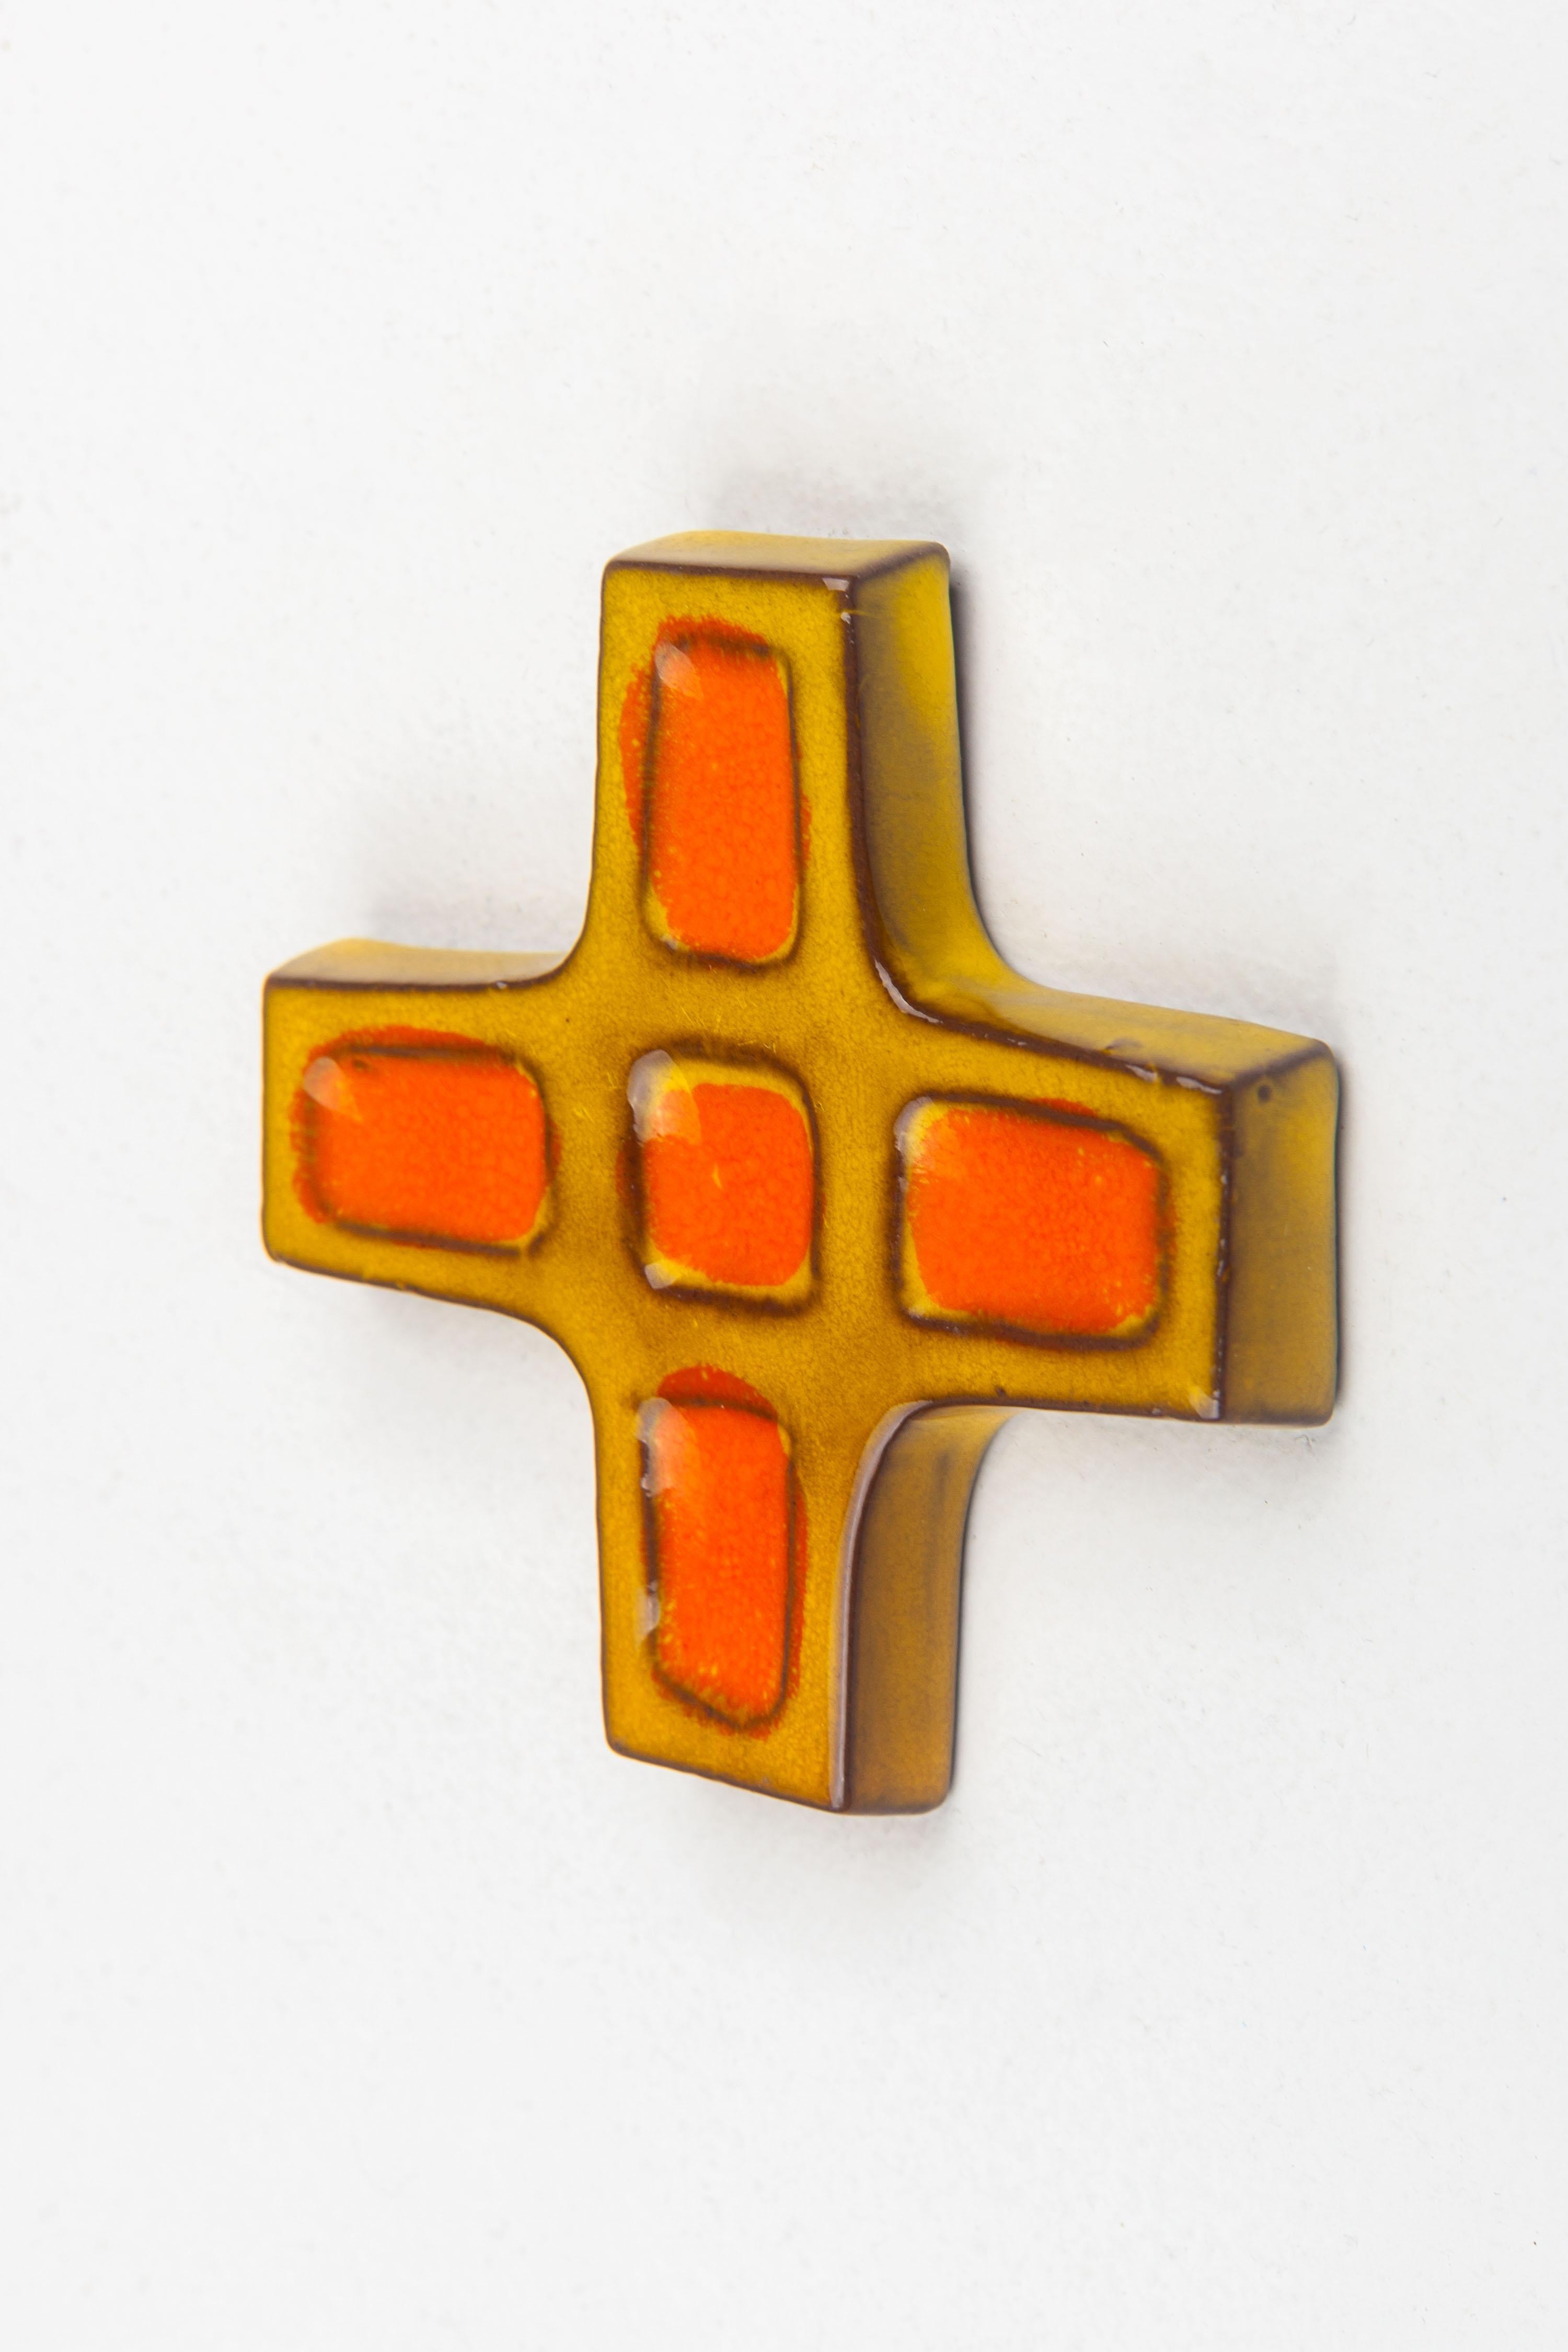 This ceramic cross epitomizes the geometric abstraction that was prevalent in mid-century modern design. Handcrafted by European studio pottery artists, the cross is a celebration of form and color. It features a series of recessed rectangles filled